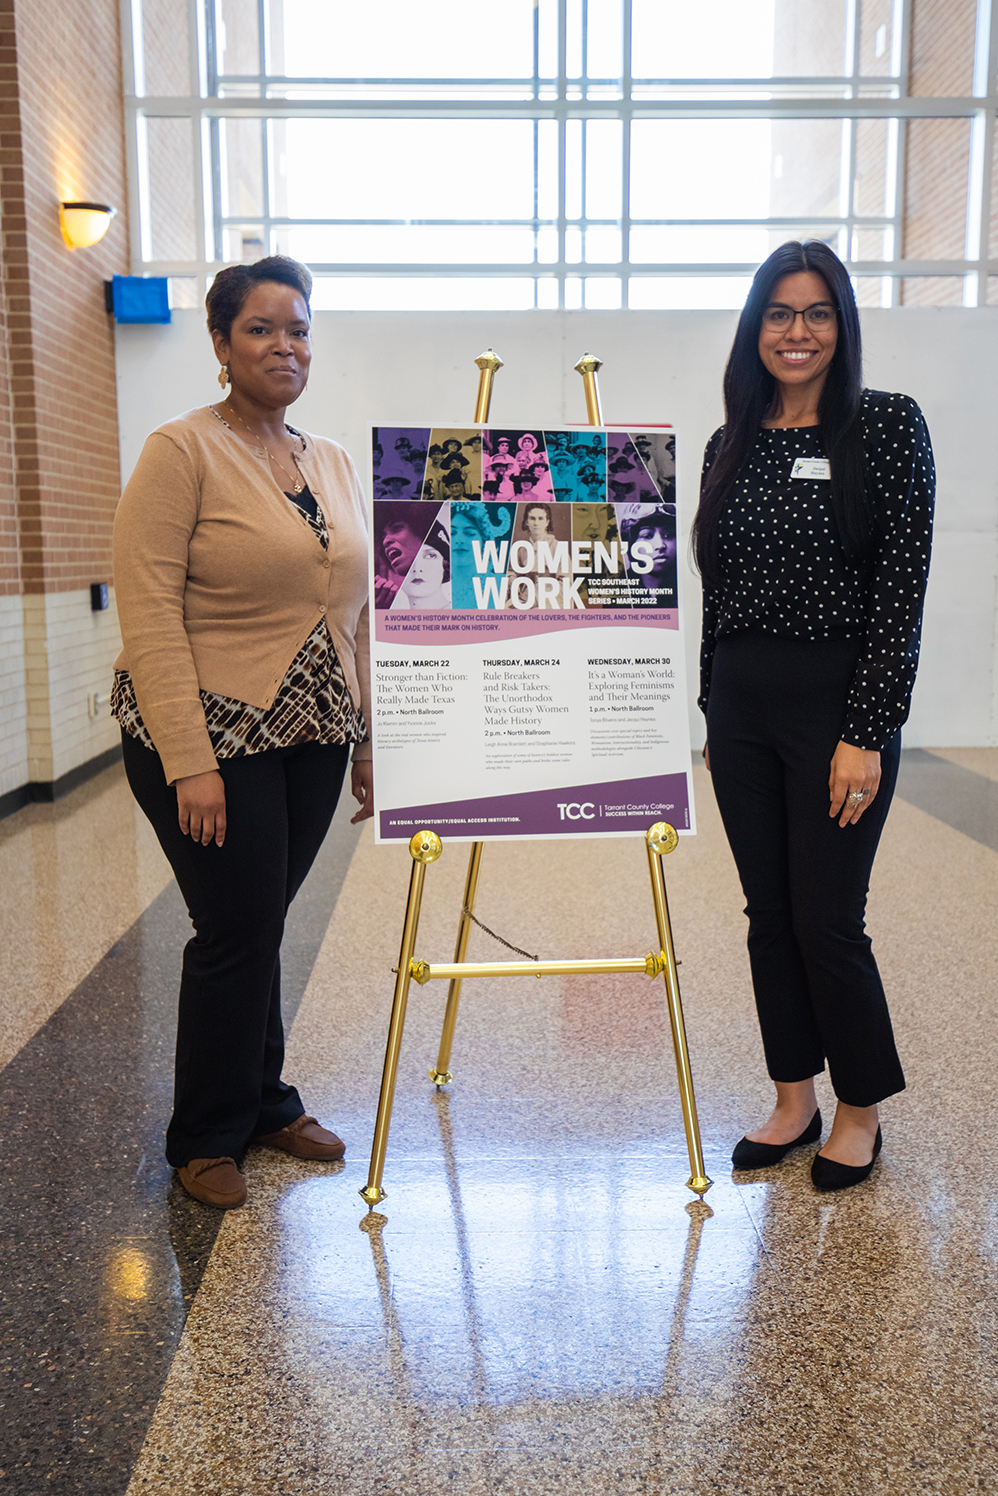 Presenters Tonya Blivens and Jacqui Haynes posing with the poster of the events that were hosted at SE Campus for Women’s History Month. Photos by Joel Solis/The Collegian